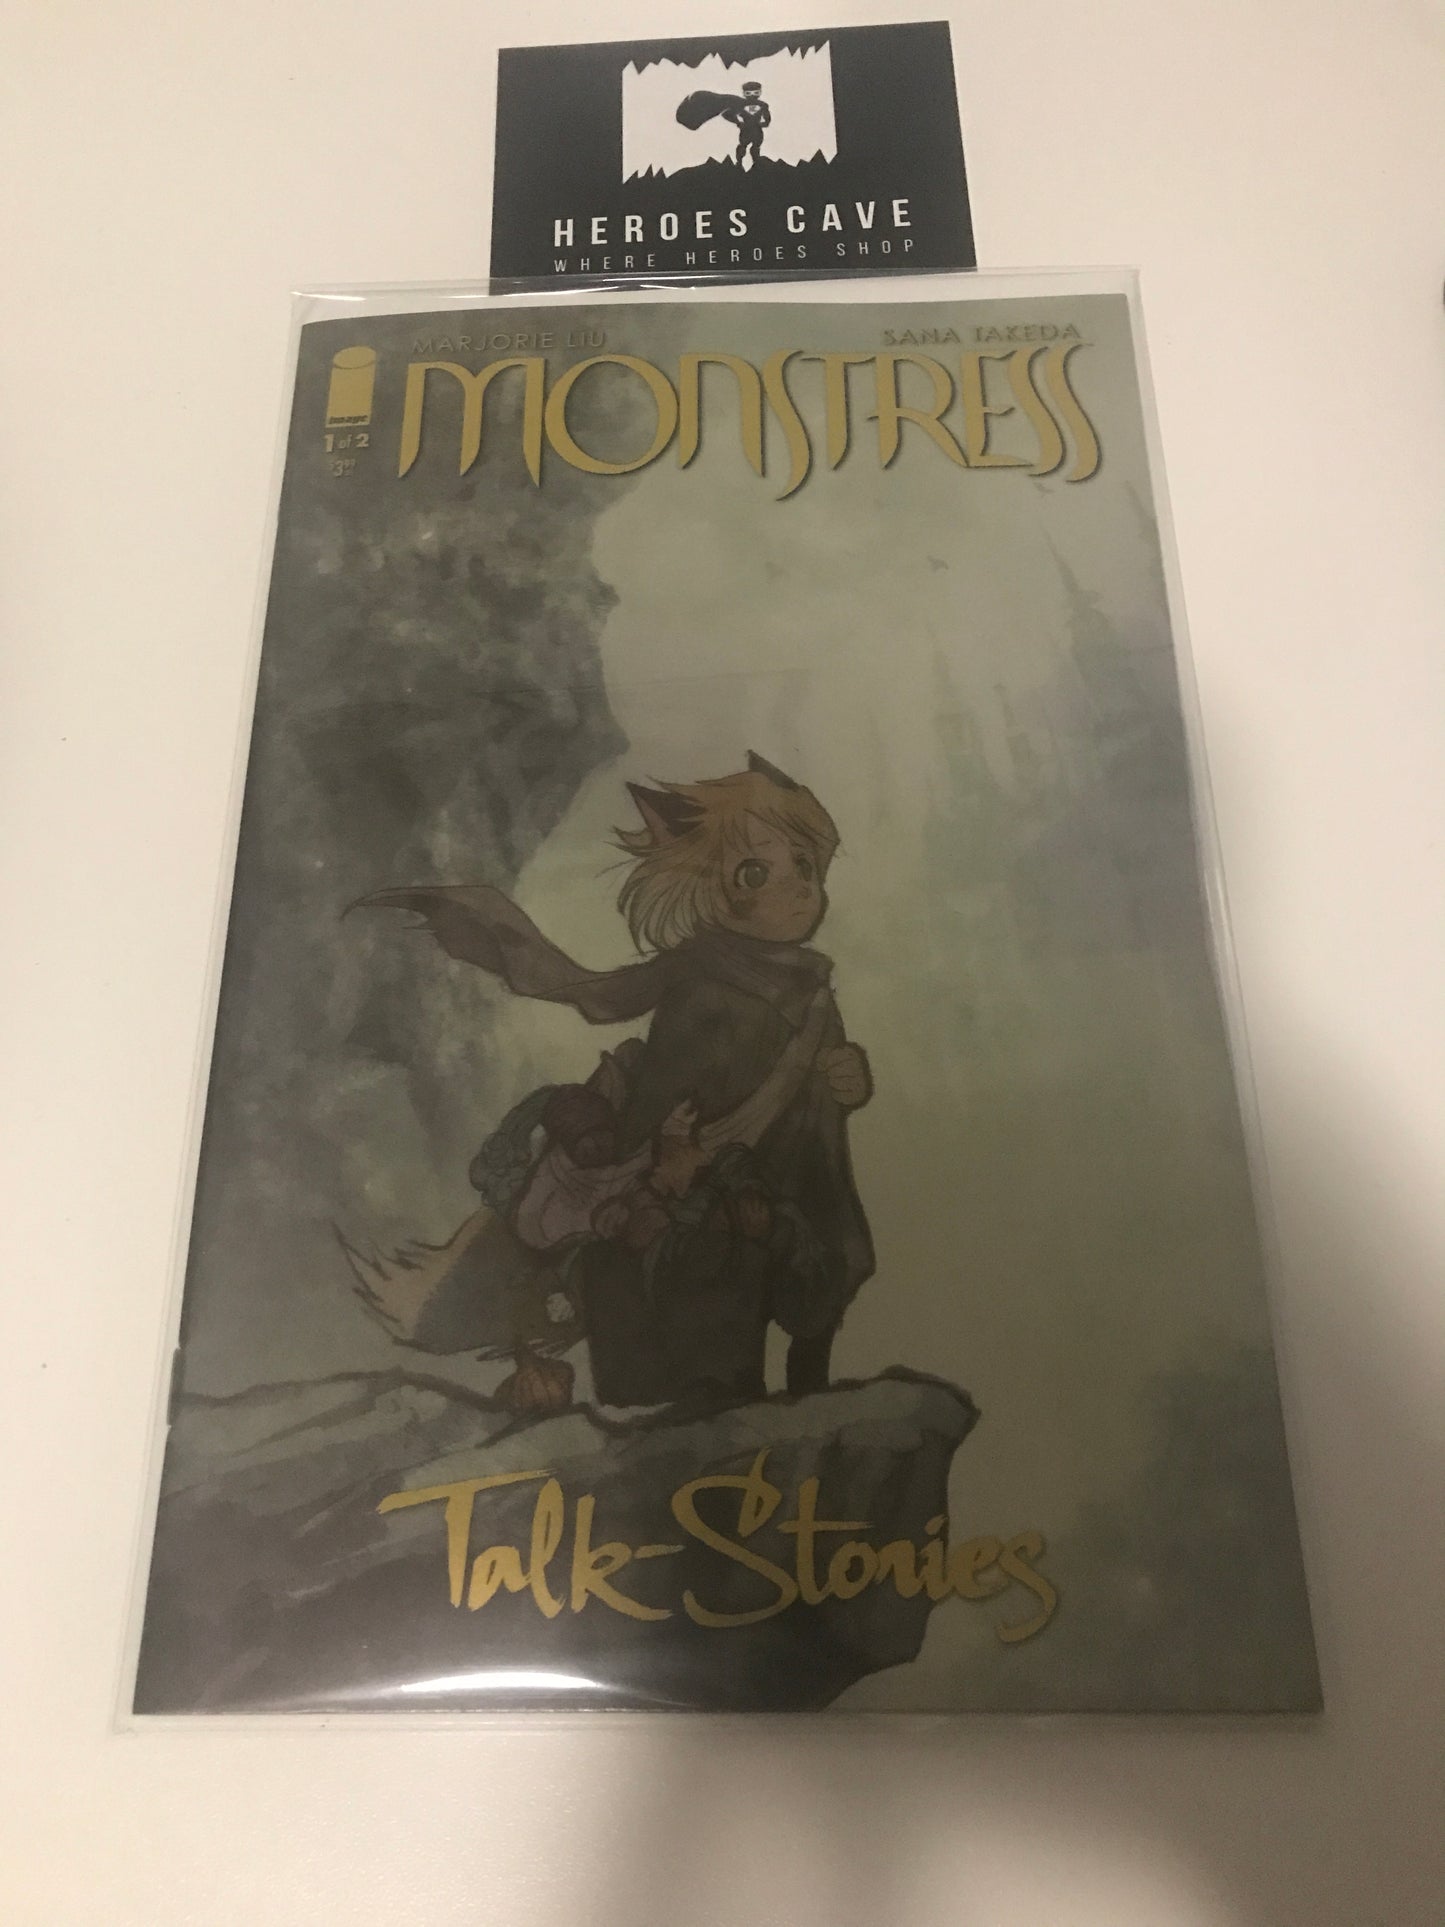 LCSD Monstress Talk-Stories 1 - Heroes Cave